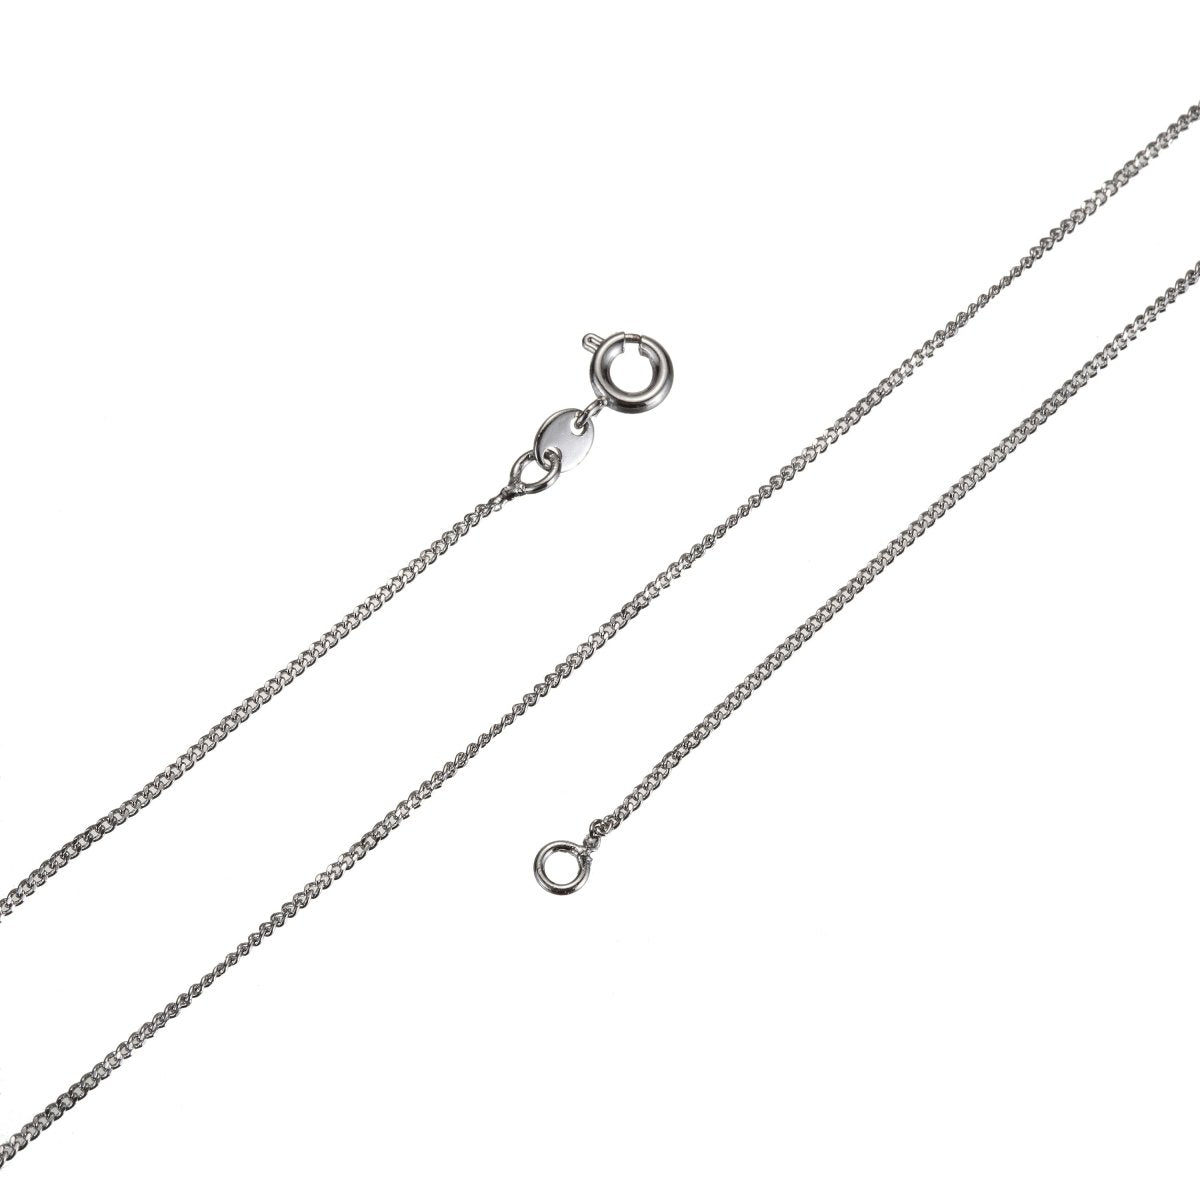 Simple Silver White Gold Chain, 17.7 inches Curb Chain, 0.5mm Thickness Dainty Silver Necklace Chain w/ Spring Ring | CN-641 Clearance Pricing - DLUXCA